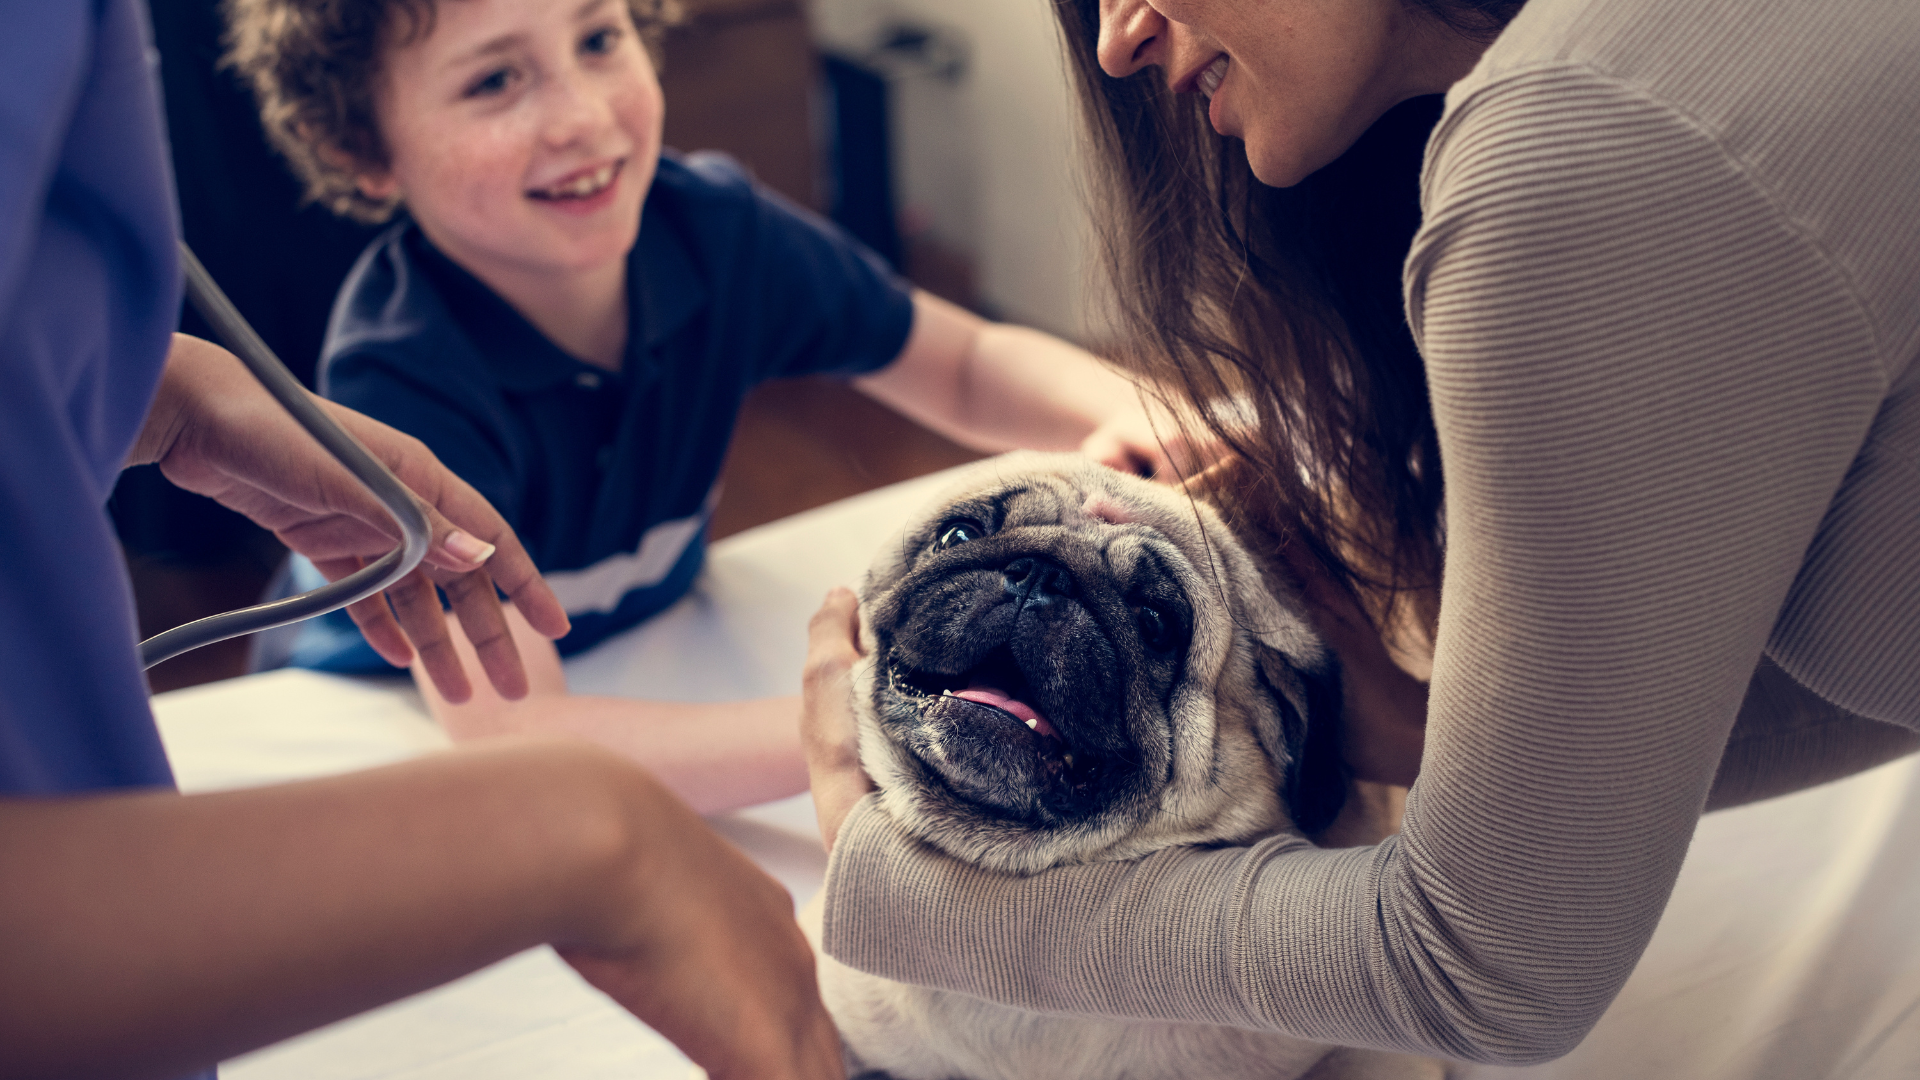 Best Dog Breeds for Families with Kids